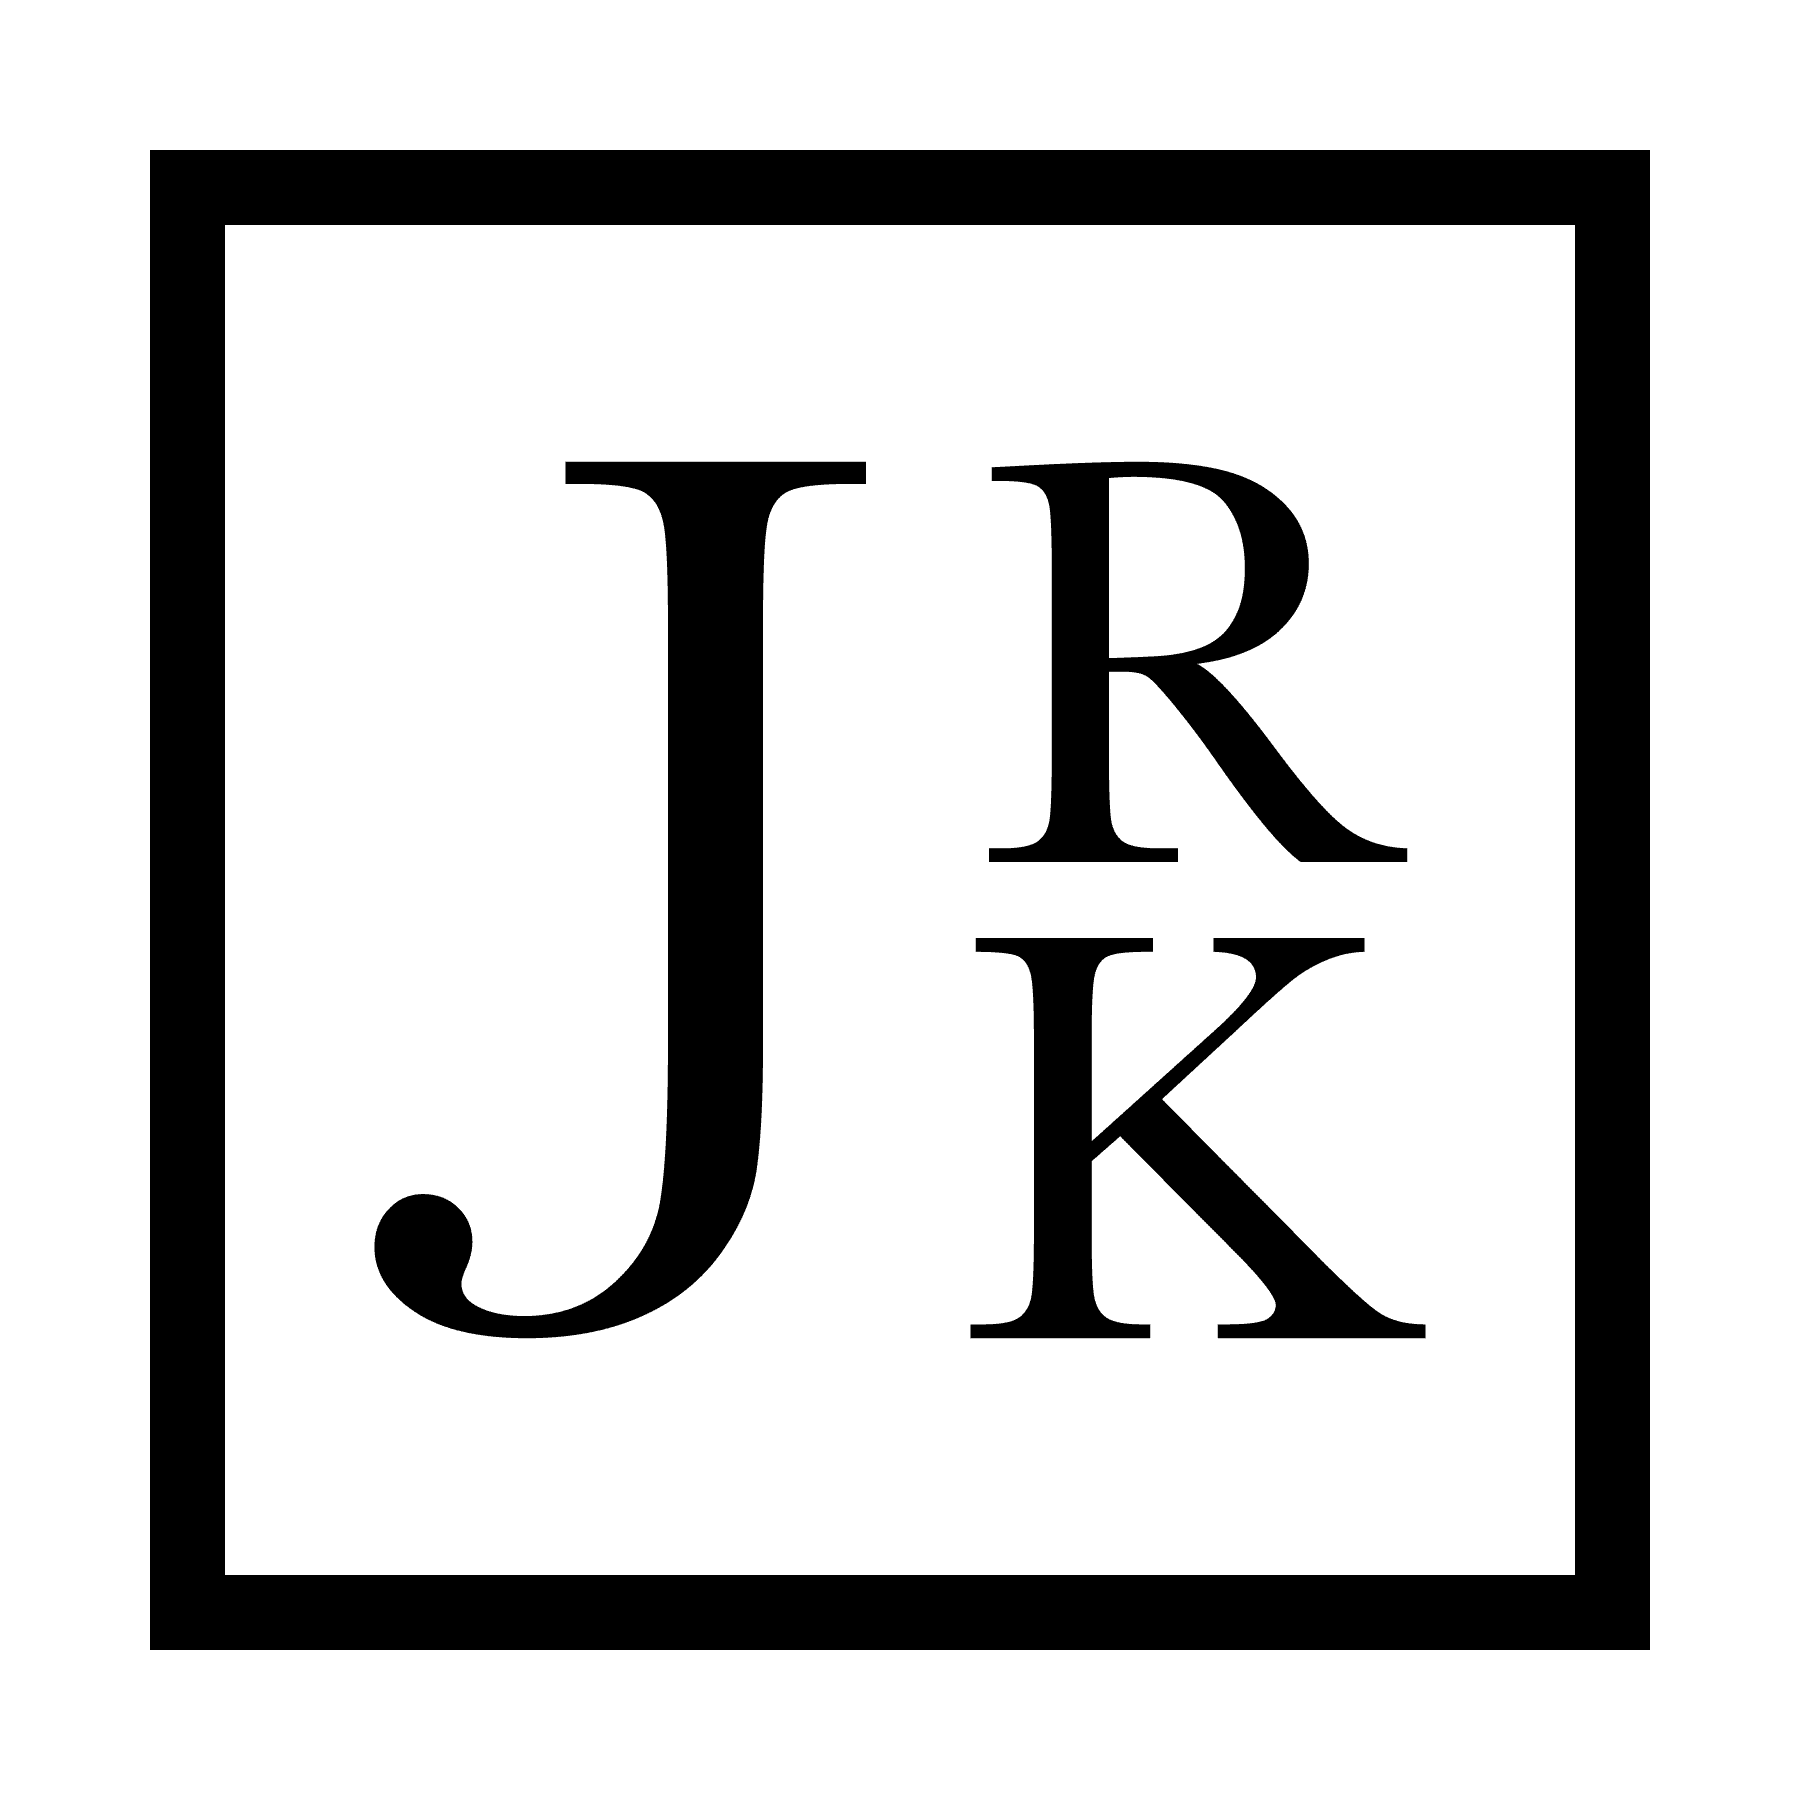 John R Kowalski favicon with the letters J, R, and K. Integrative marketing fusion.